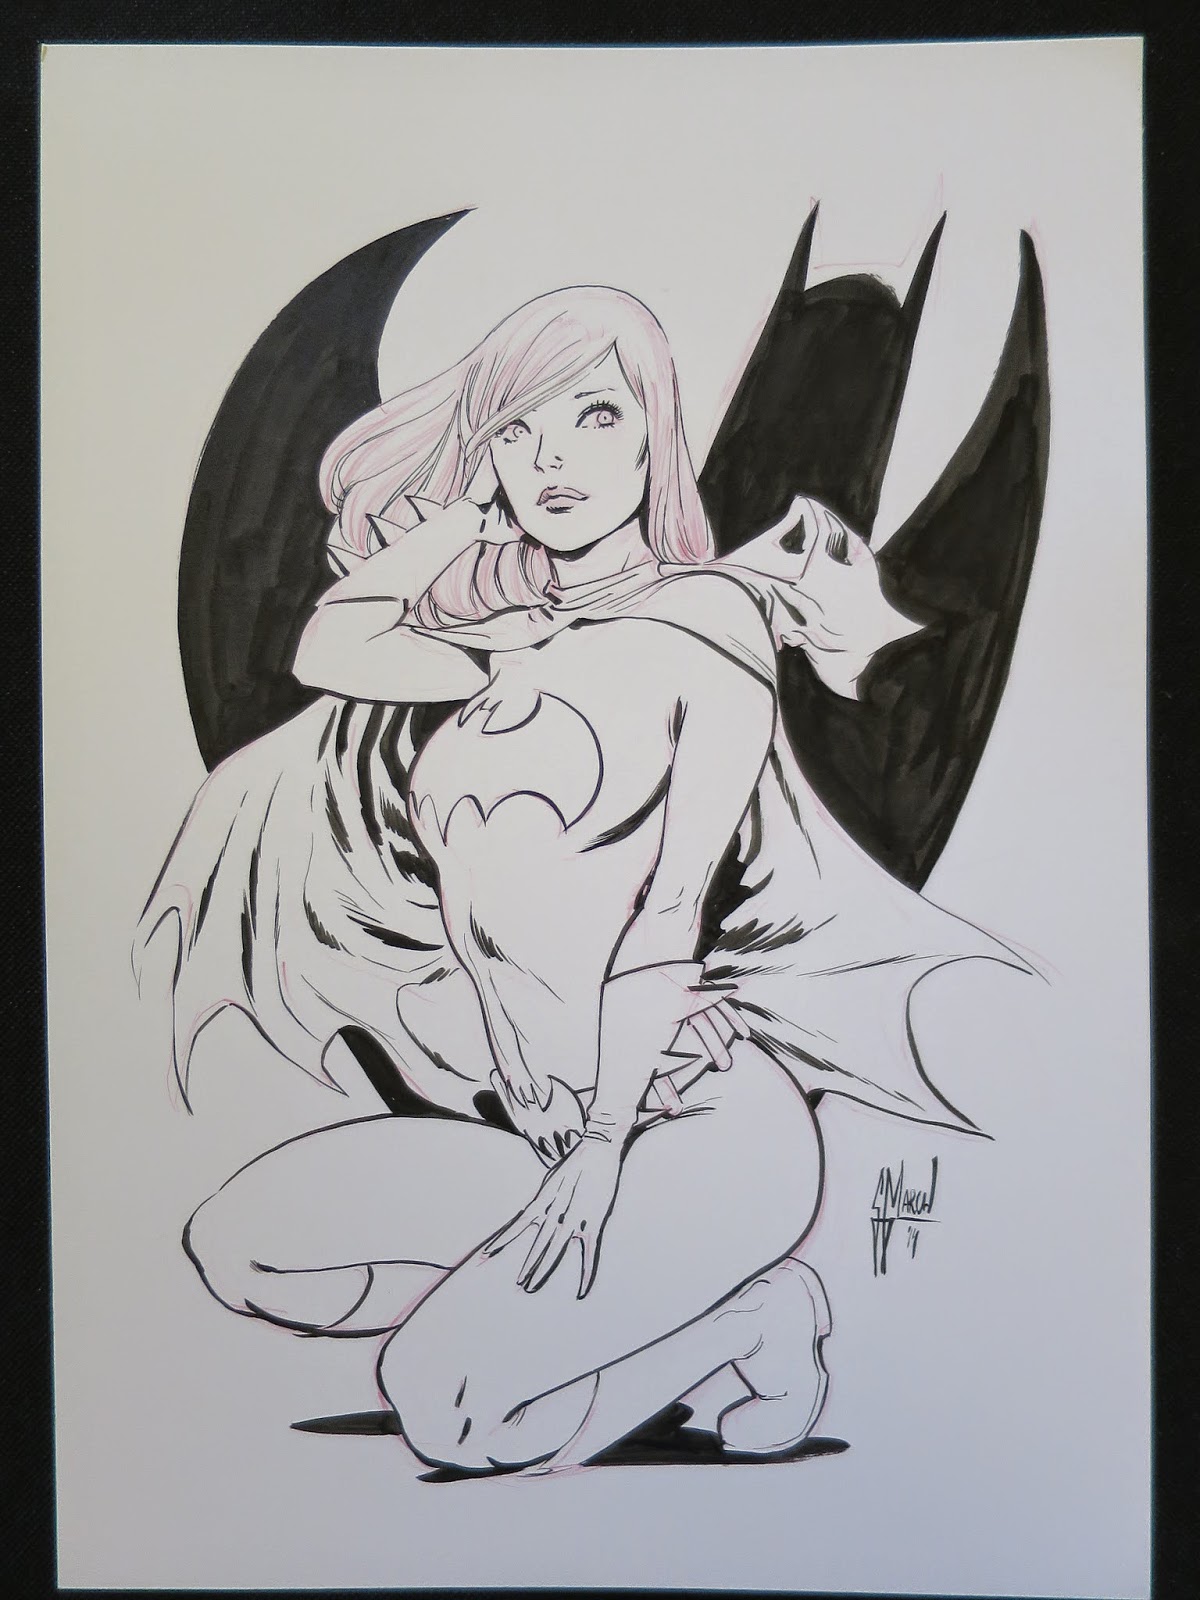 Commissions from last weekend at the PHILADELPHIA WIZARD WORLD Comic Con by Guillem March